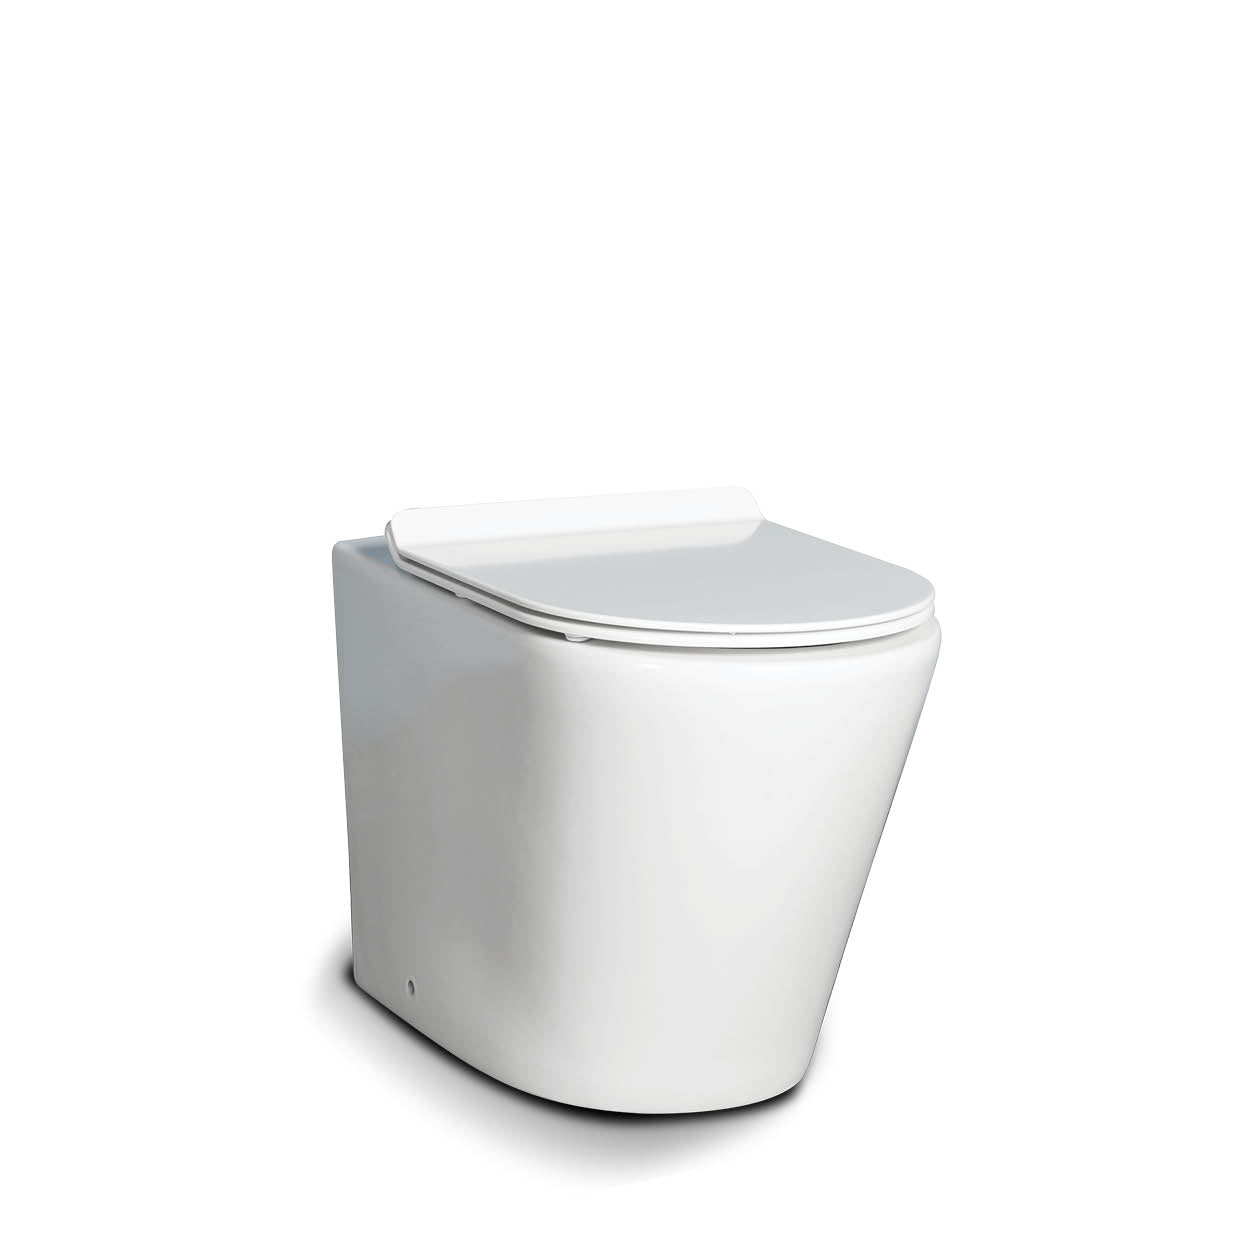 The Eyre Rimless Concealed Cistern Toilet Ex-Display